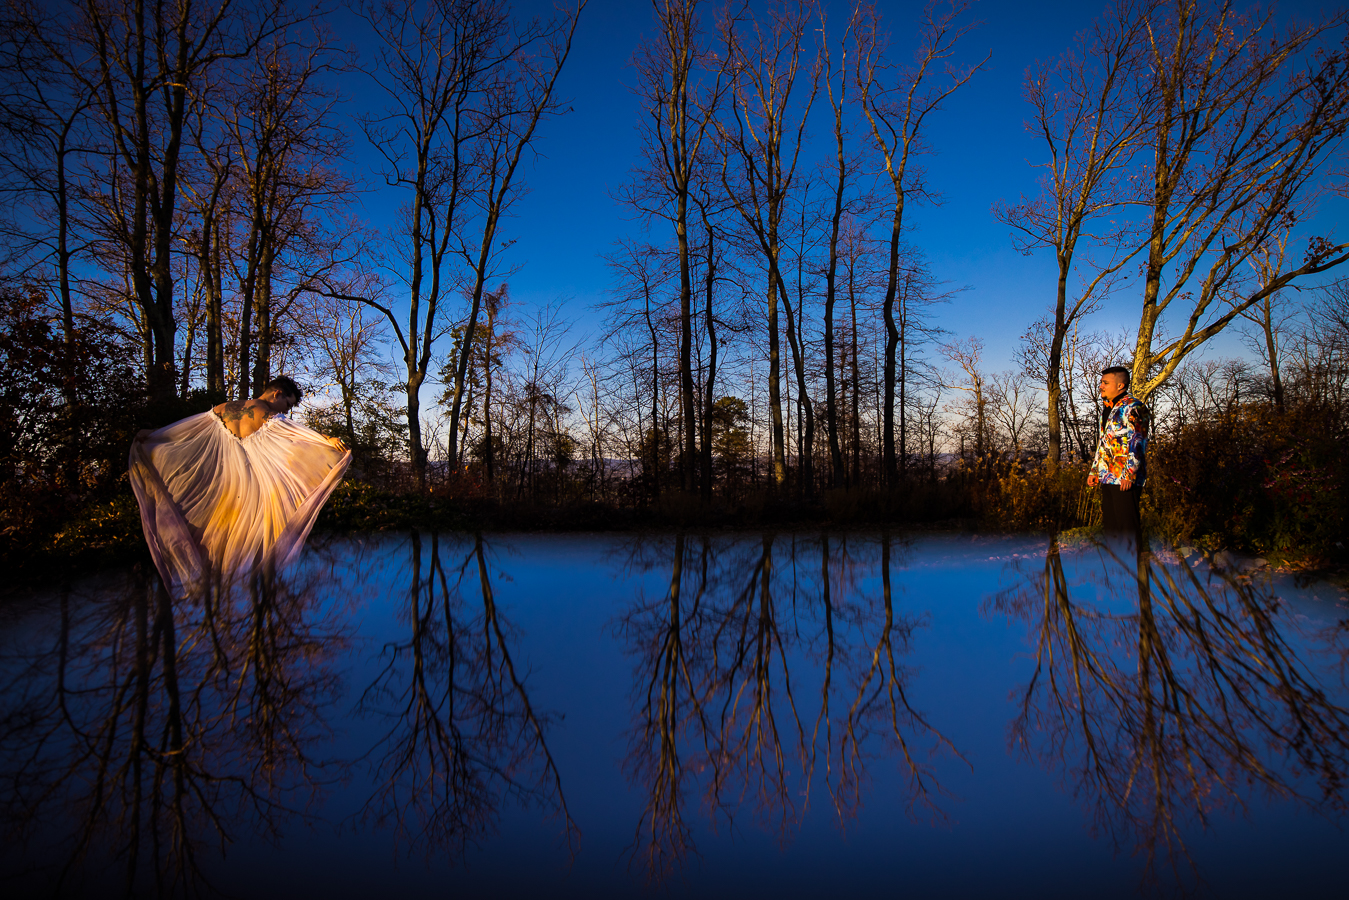 Creative LGBTQ Wedding Photographer, lisa rhinehart, captures this vibrant, colorful, creative image of the couple in nature with their reflection s captured as well